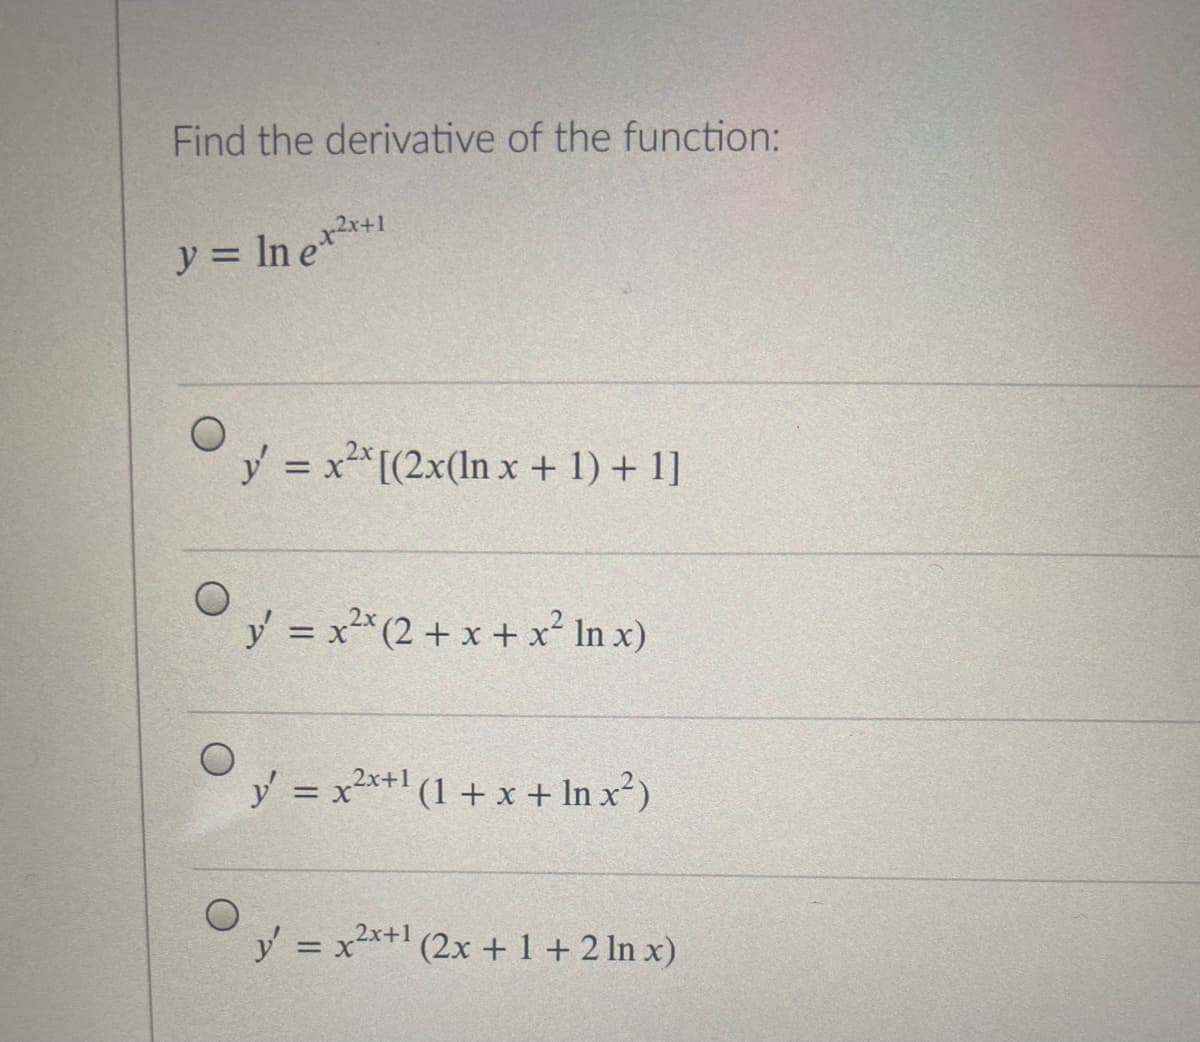 Find the derivative of the function:
y = In e**+1
y = x*[(2x(ln x + 1) + 1]
y = x2* (2 + x + x² In x)
%3D
V =
y = x2x+1 (1 + x + In x²)
y = x2x+1 (2x +1+2 ln x)
